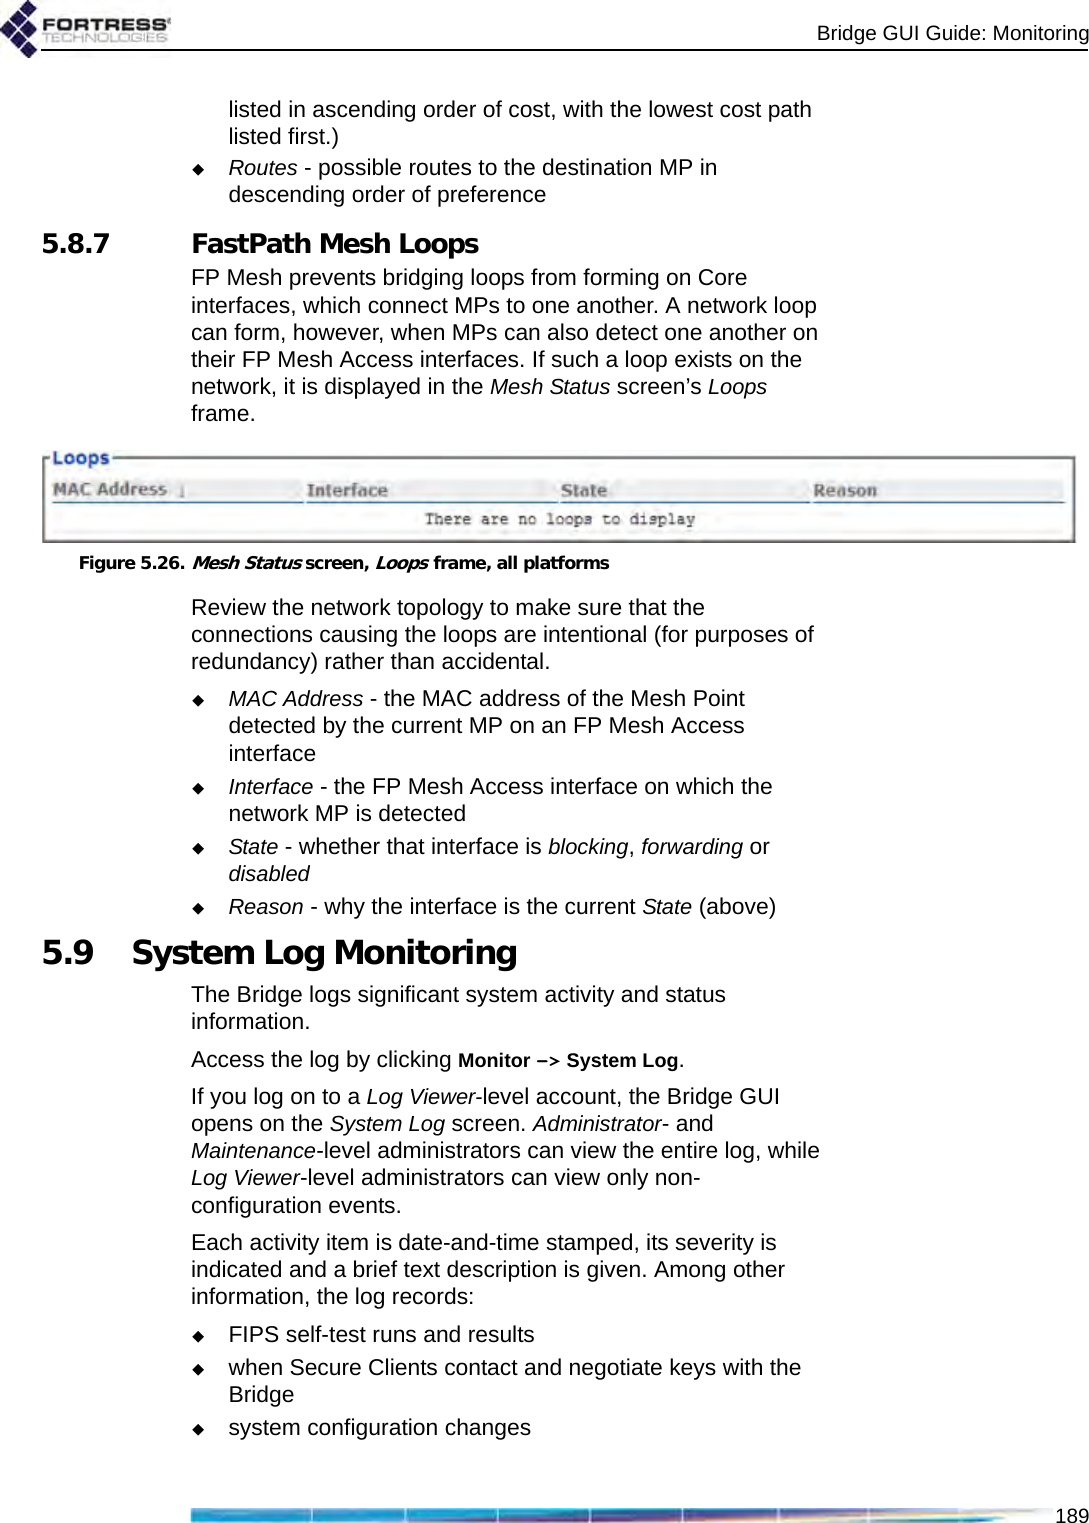 Bridge GUI Guide: Monitoring189listed in ascending order of cost, with the lowest cost path listed first.)Routes - possible routes to the destination MP in descending order of preference5.8.7 FastPath Mesh LoopsFP Mesh prevents bridging loops from forming on Core interfaces, which connect MPs to one another. A network loop can form, however, when MPs can also detect one another on their FP Mesh Access interfaces. If such a loop exists on the network, it is displayed in the Mesh Status screen’s Loops frame.Figure 5.26.Mesh Status screen, Loops frame, all platformsReview the network topology to make sure that the connections causing the loops are intentional (for purposes of redundancy) rather than accidental. MAC Address - the MAC address of the Mesh Point detected by the current MP on an FP Mesh Access interfaceInterface - the FP Mesh Access interface on which the network MP is detectedState - whether that interface is blocking, forwarding or disabledReason - why the interface is the current State (above)5.9 System Log MonitoringThe Bridge logs significant system activity and status information.Access the log by clicking Monitor -&gt; System Log.If you log on to a Log Viewer-level account, the Bridge GUI opens on the System Log screen. Administrator- and Maintenance-level administrators can view the entire log, while Log Viewer-level administrators can view only non-configuration events.Each activity item is date-and-time stamped, its severity is indicated and a brief text description is given. Among other information, the log records:FIPS self-test runs and resultswhen Secure Clients contact and negotiate keys with the Bridgesystem configuration changes